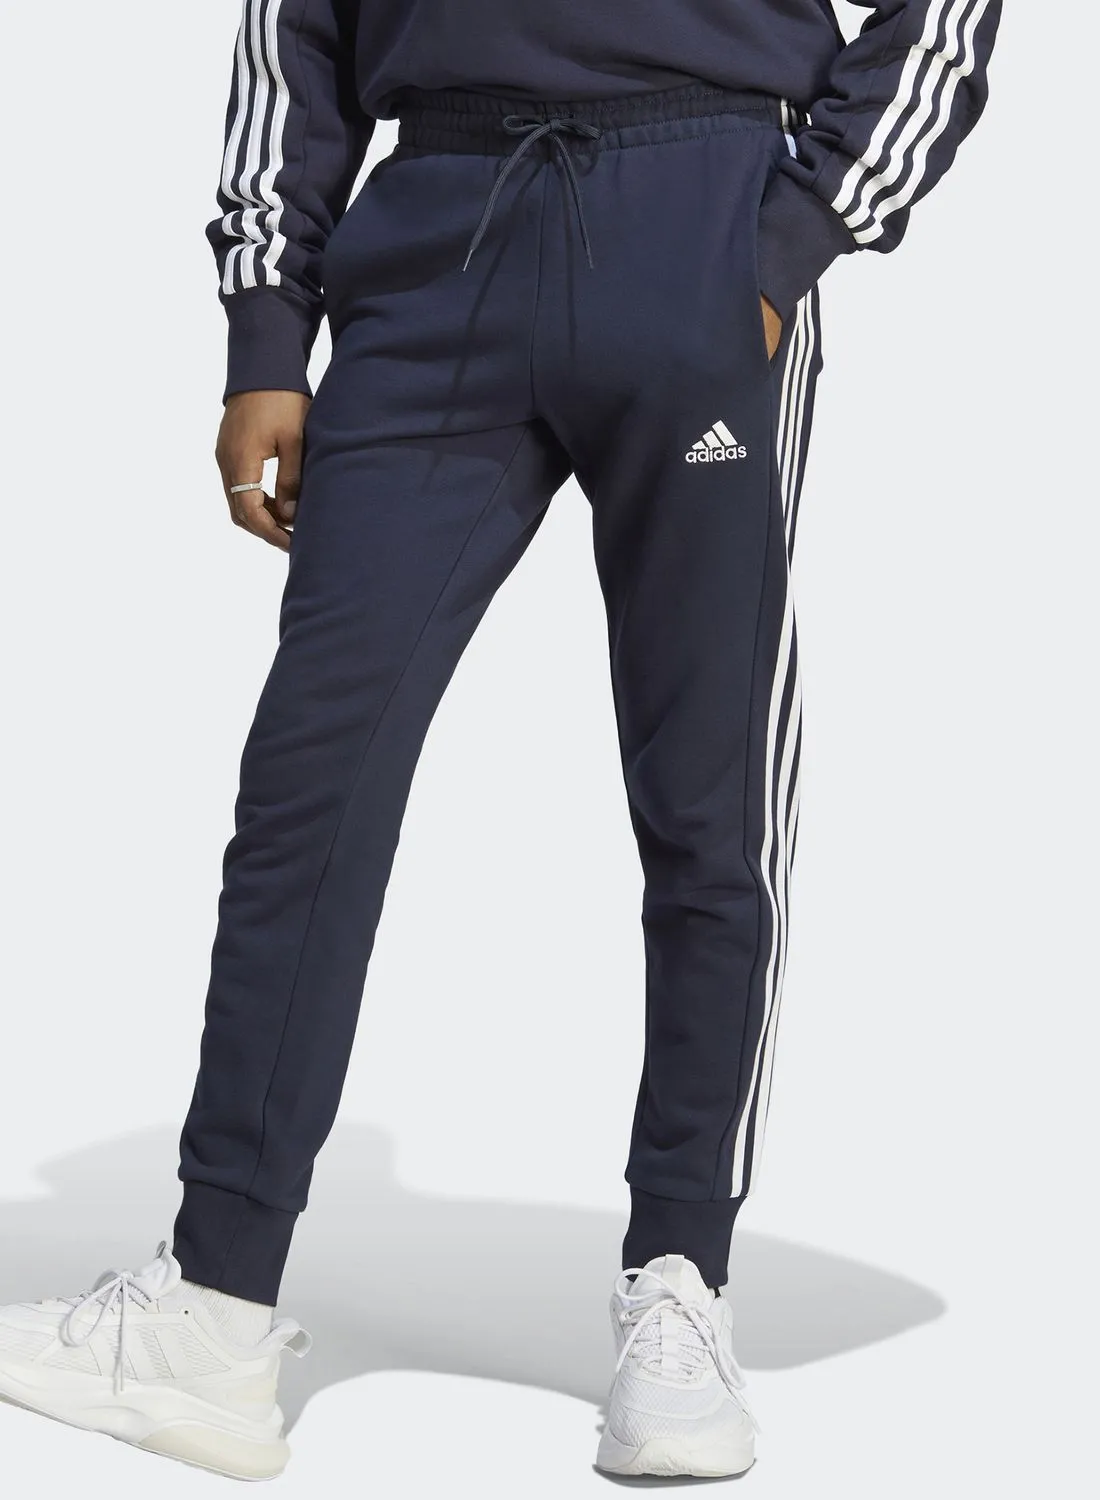 Adidas 3 Stripes French Terry Sweatpants